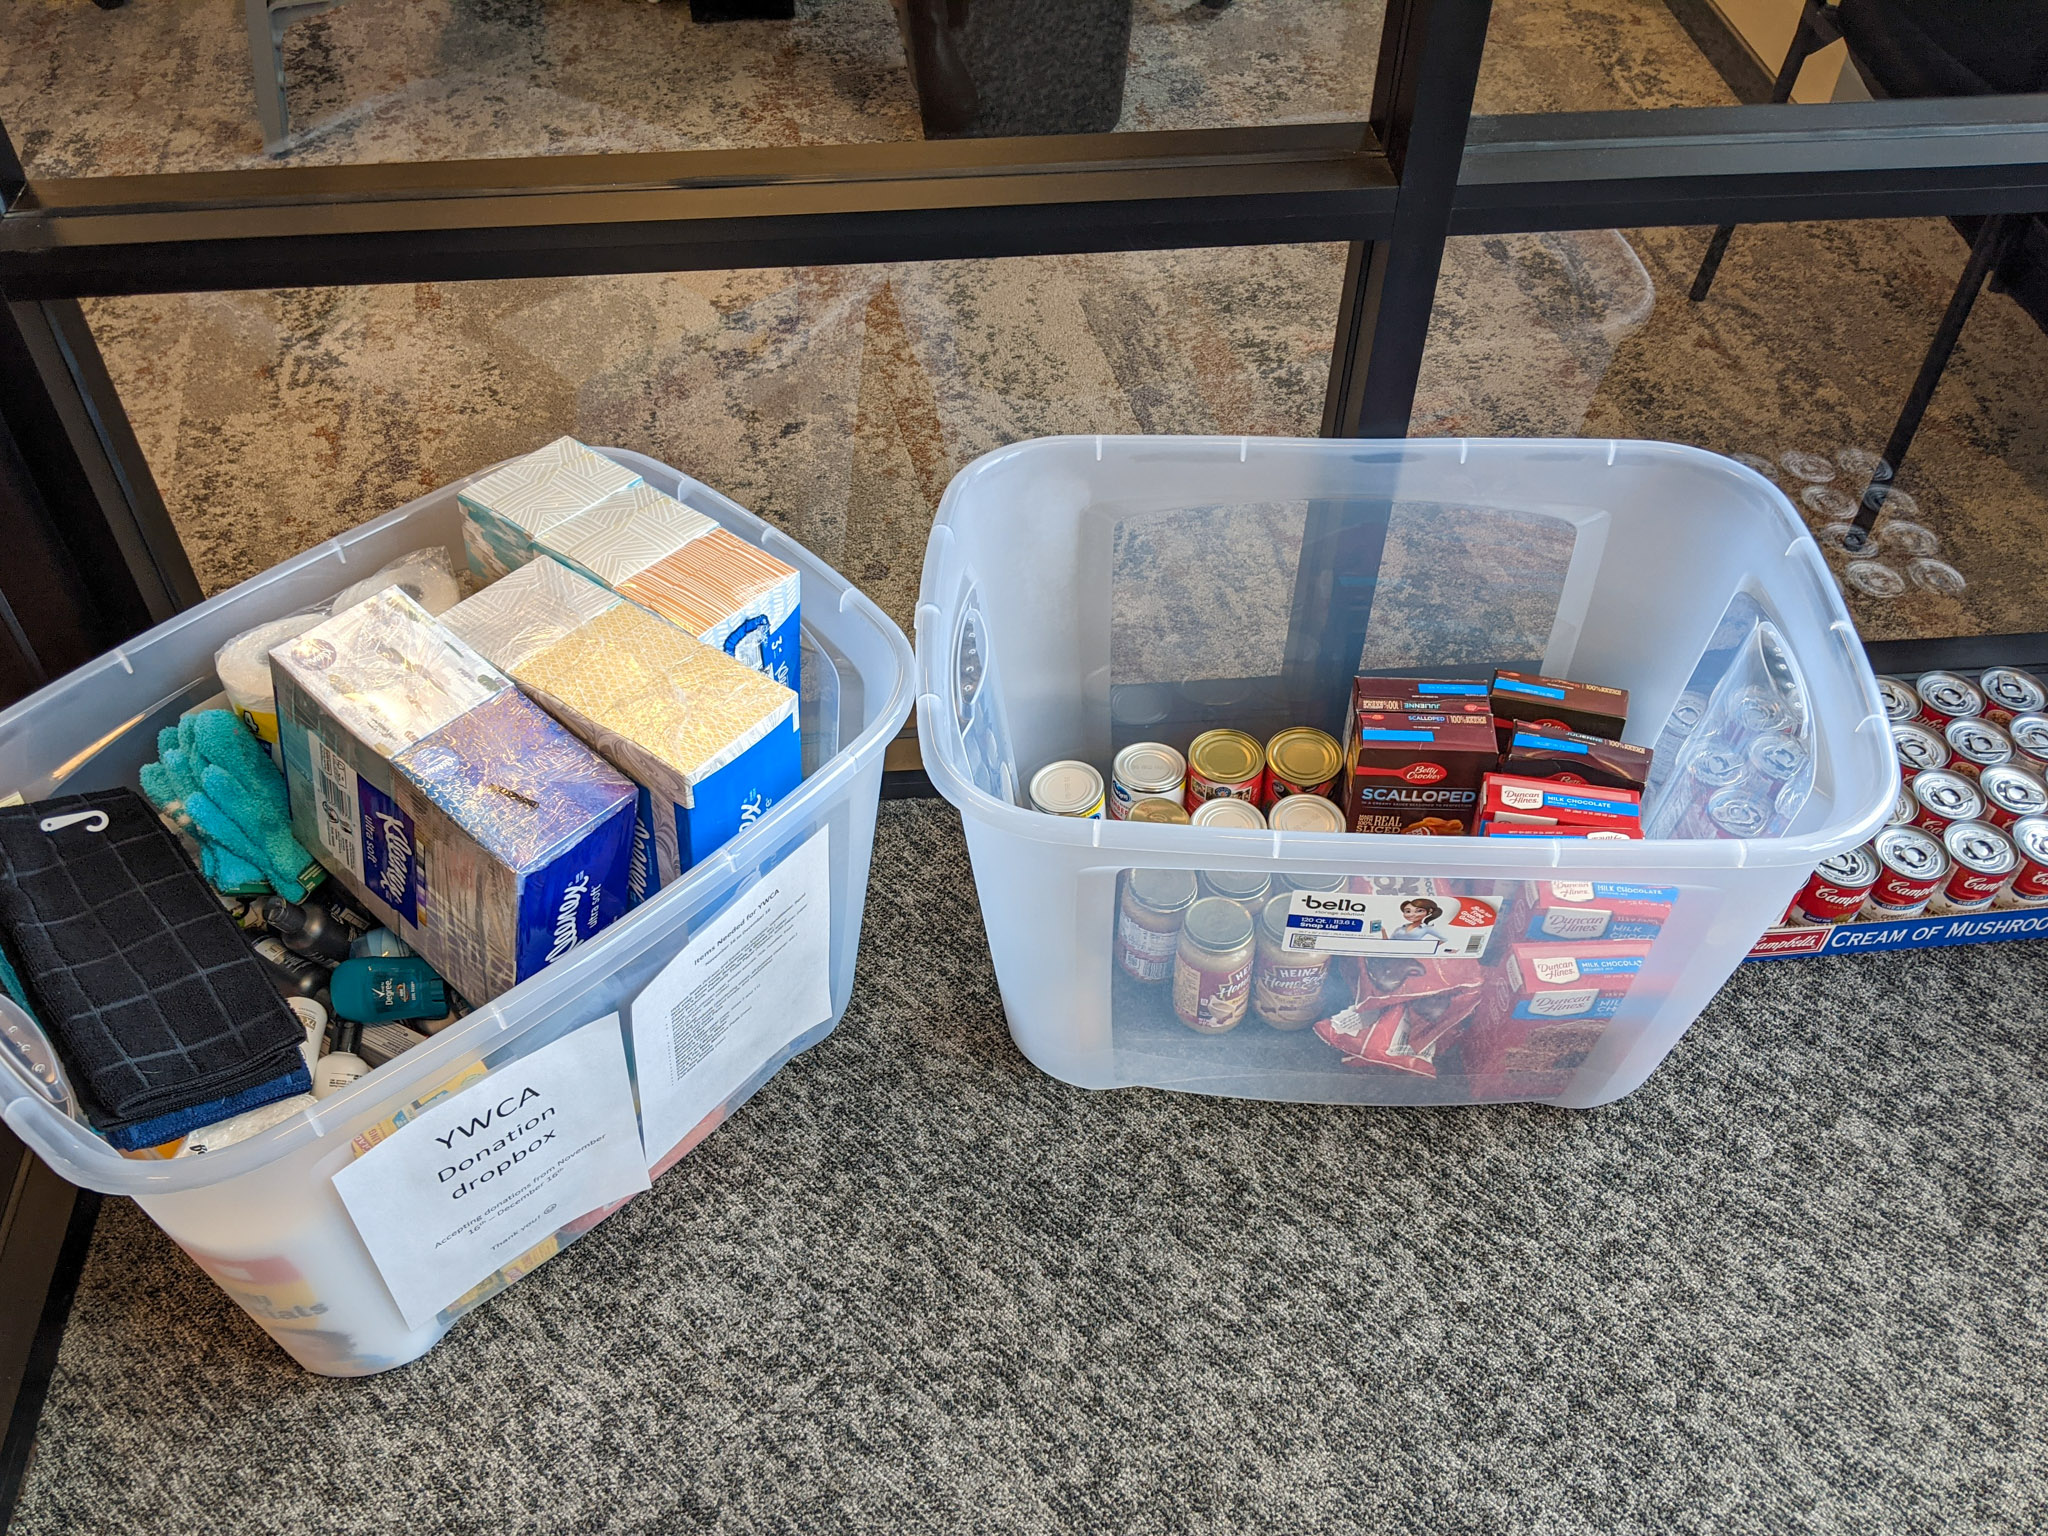 Prairie Property Management hosting Donation Drive for YWCA